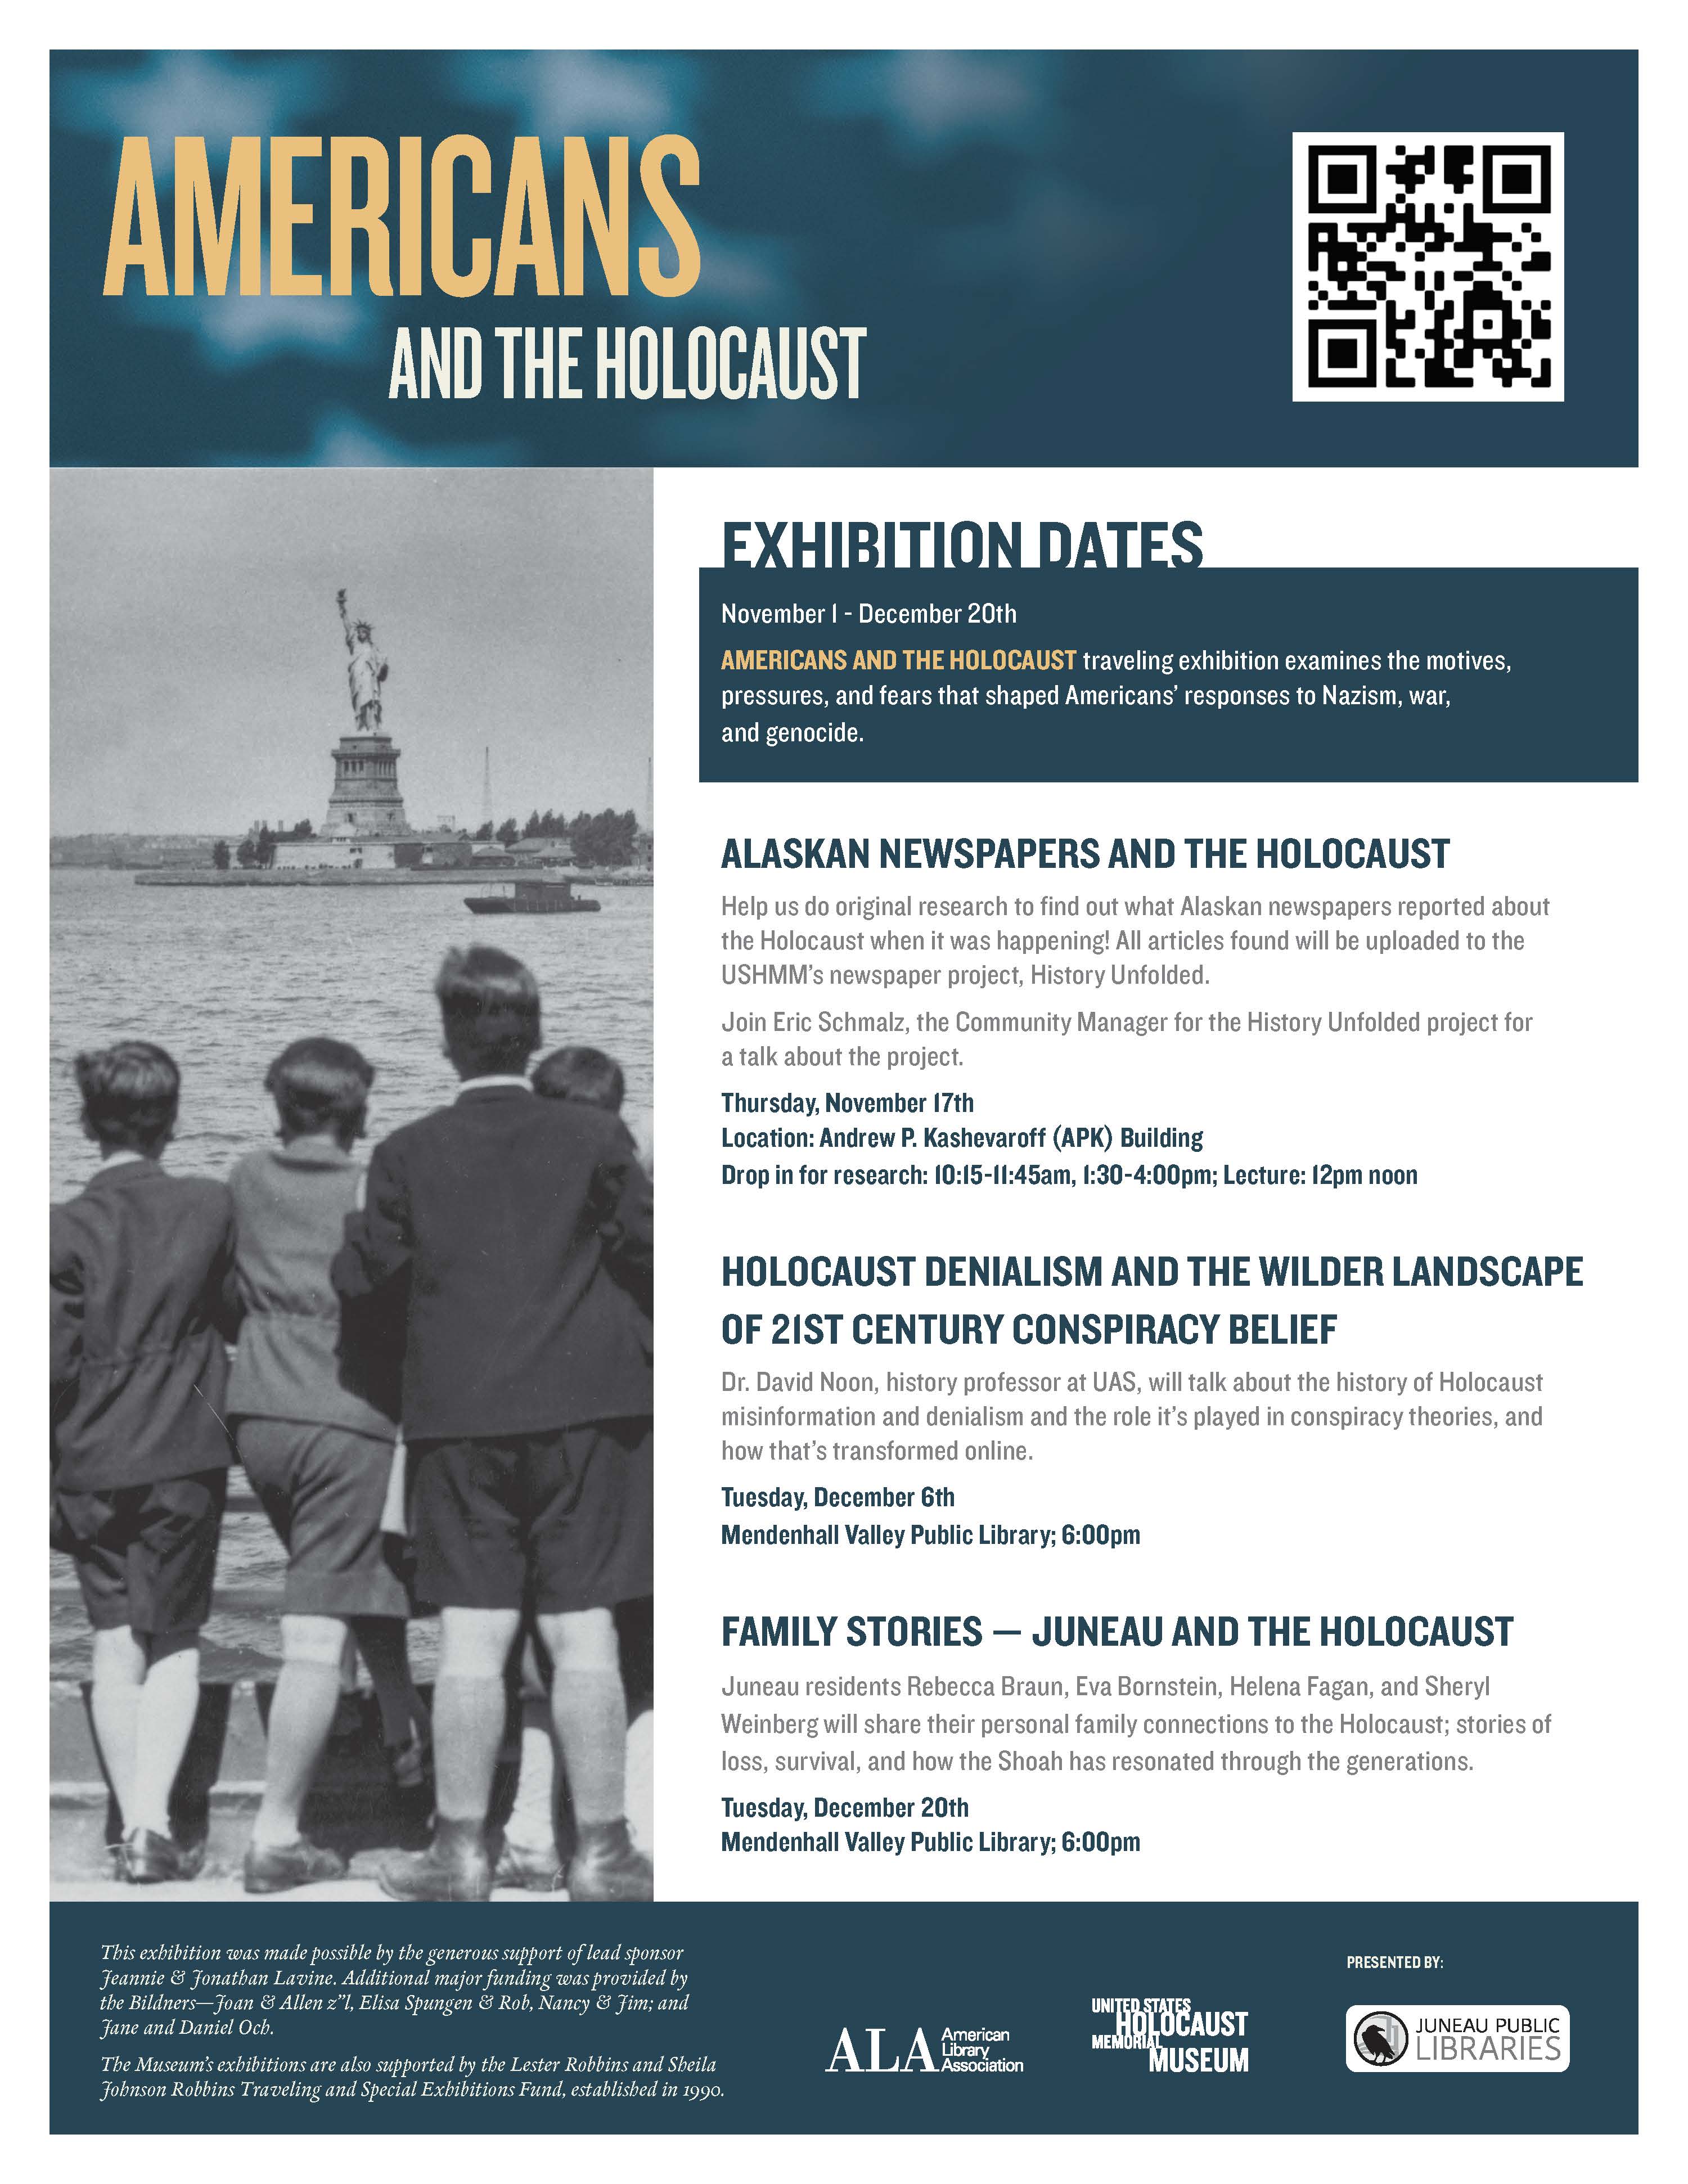 Poster Image of "Americans and The Holocaust" Exhibit